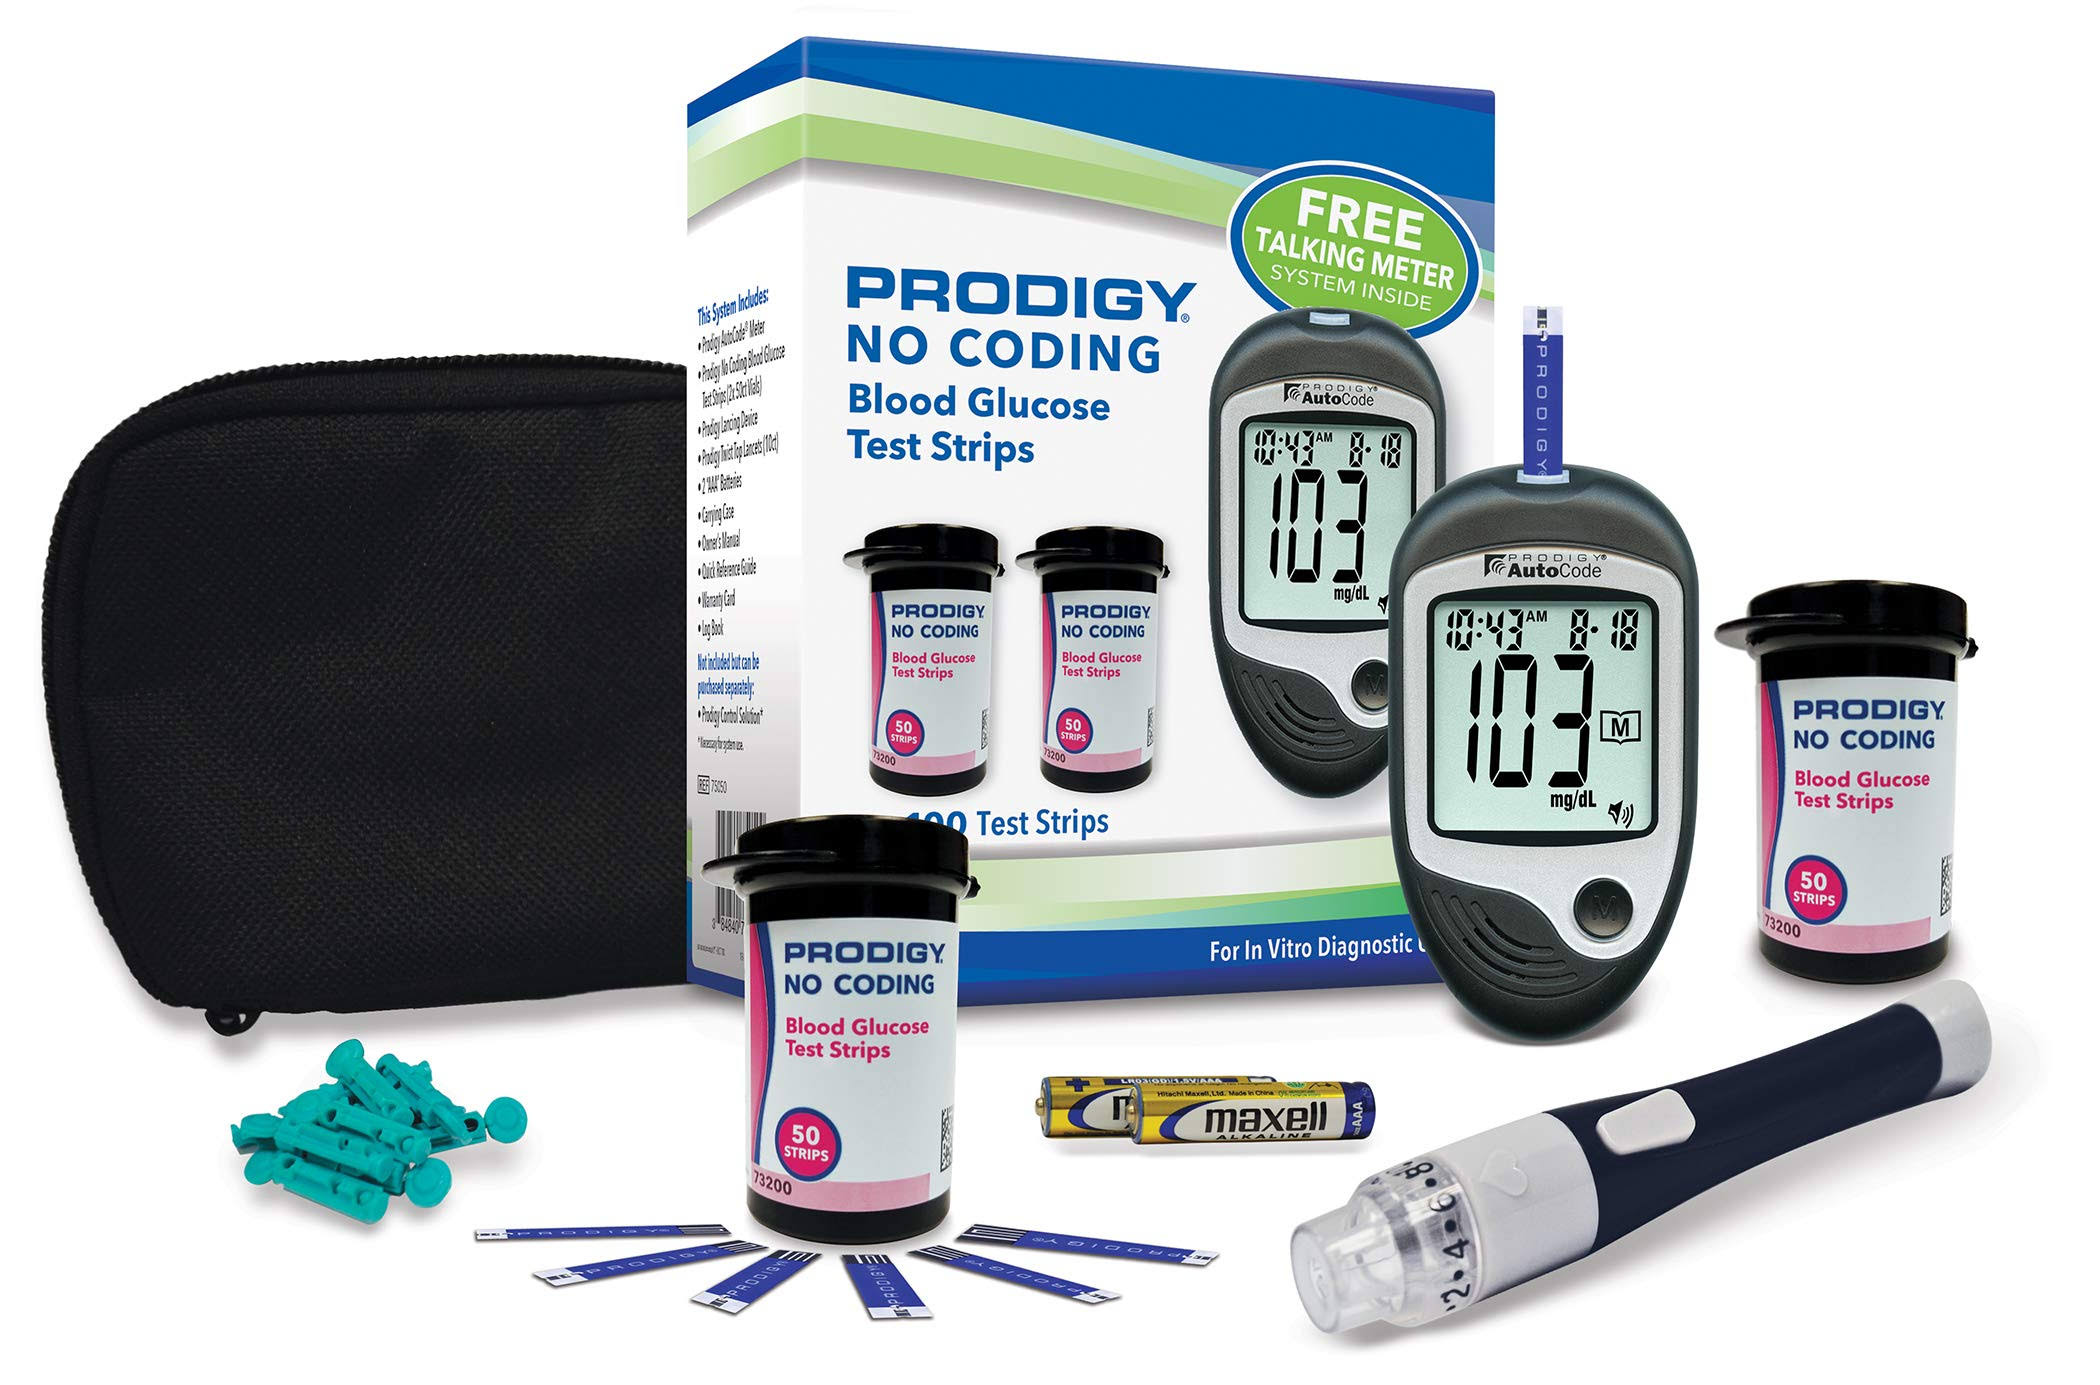 Prodigy Glucose Monitor Kit - Includes Prodigy Meter, 100ct Test Strips, 10ct